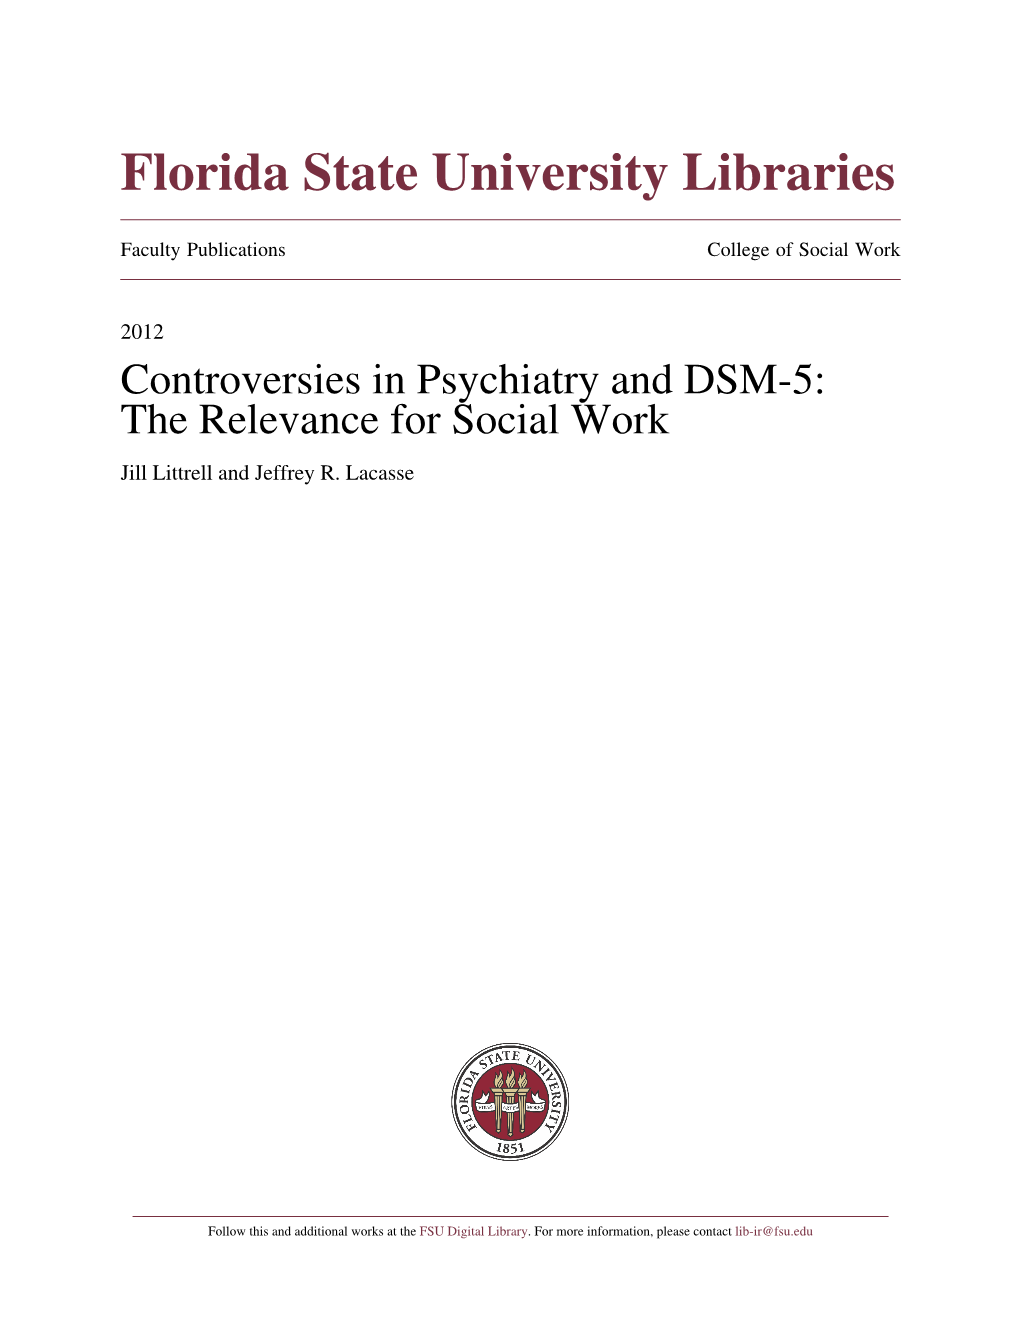 Controversies in Psychiatry and DSM-5: the Relevance for Social Work Jill Littrell and Jeffrey R